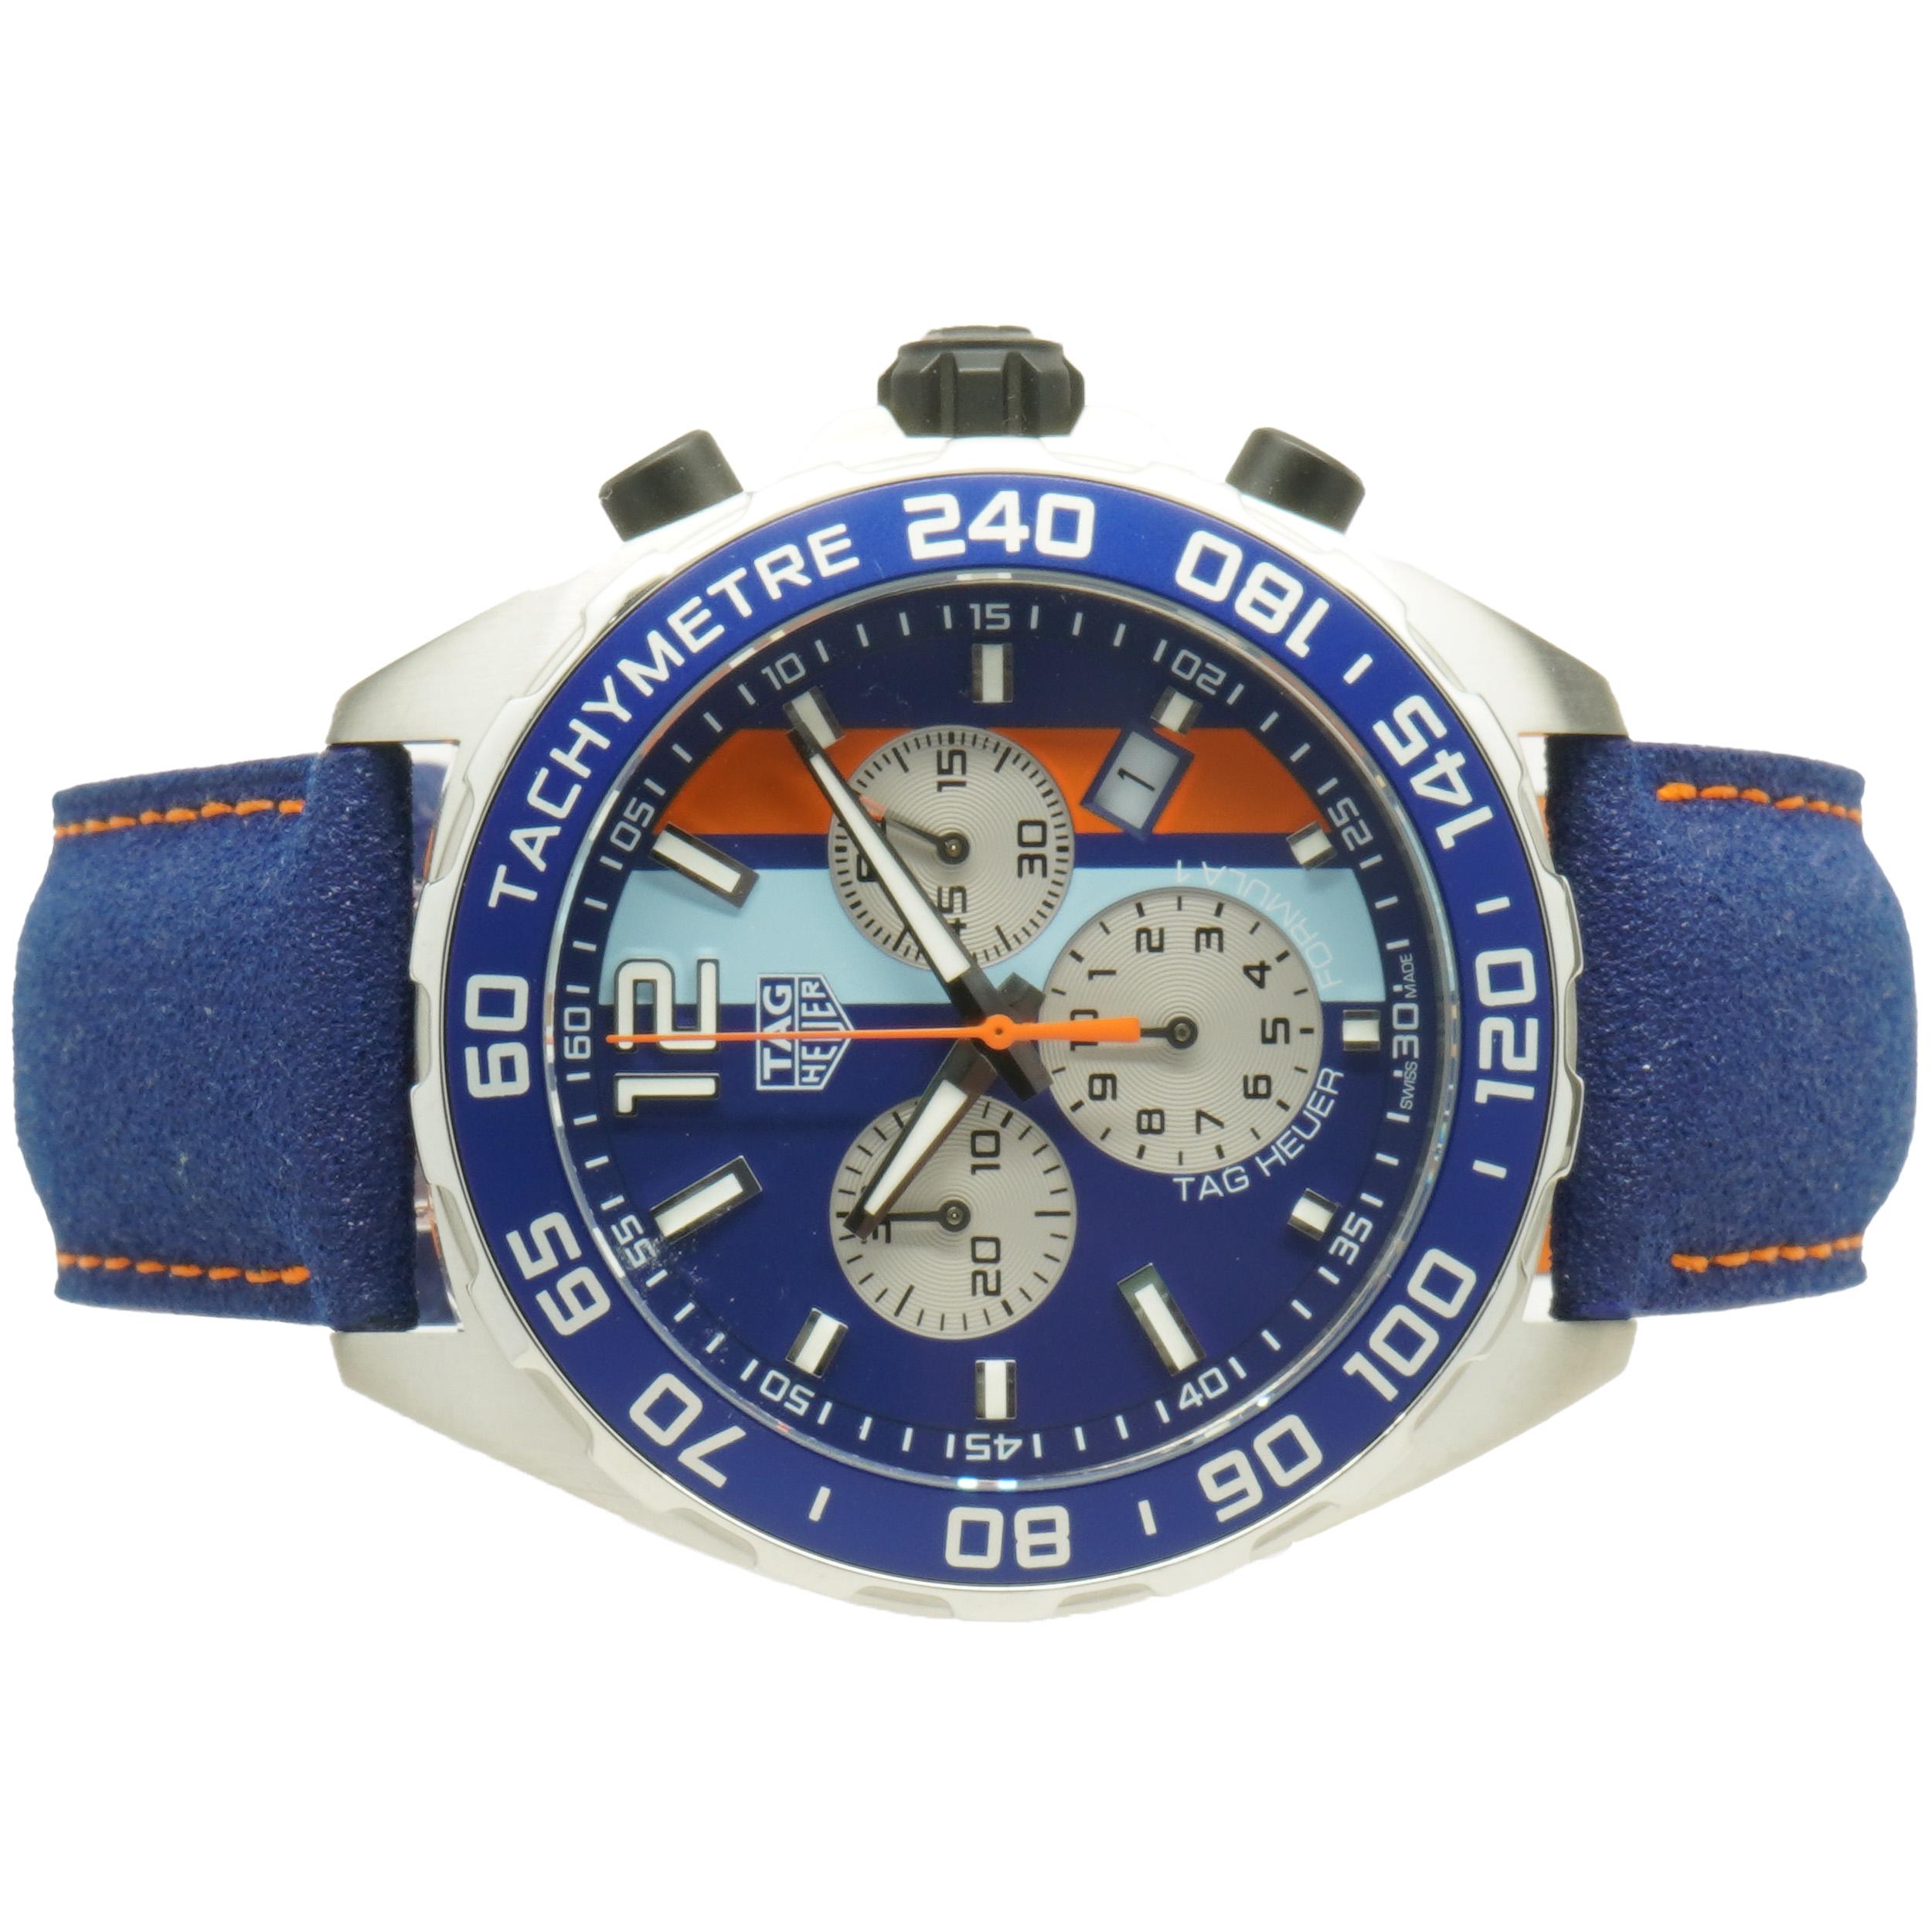 Movement: quartz
Function: hours, minuets, seconds, date, chronograph
Case: 43mm stainless steel, tachymeter bezel
Dial: Steve McQueen blue-orange
Band: blue leather strap, buckle
Reference#: CAZ101N
Serial#: BRG3XXX

Complete with original box and